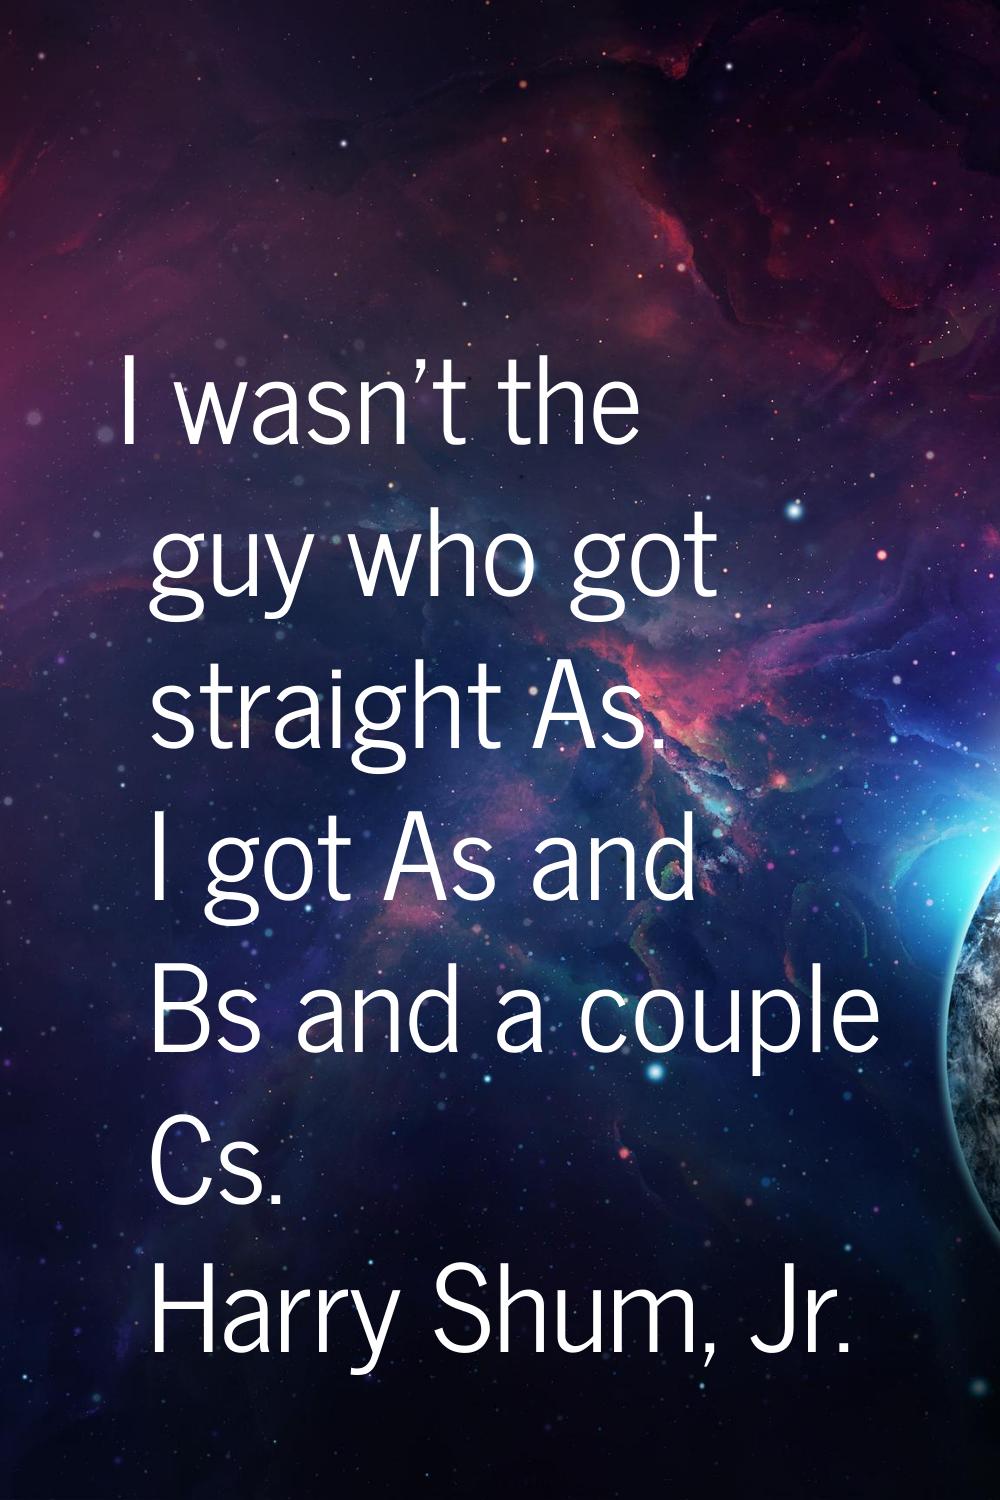 I wasn't the guy who got straight As. I got As and Bs and a couple Cs.